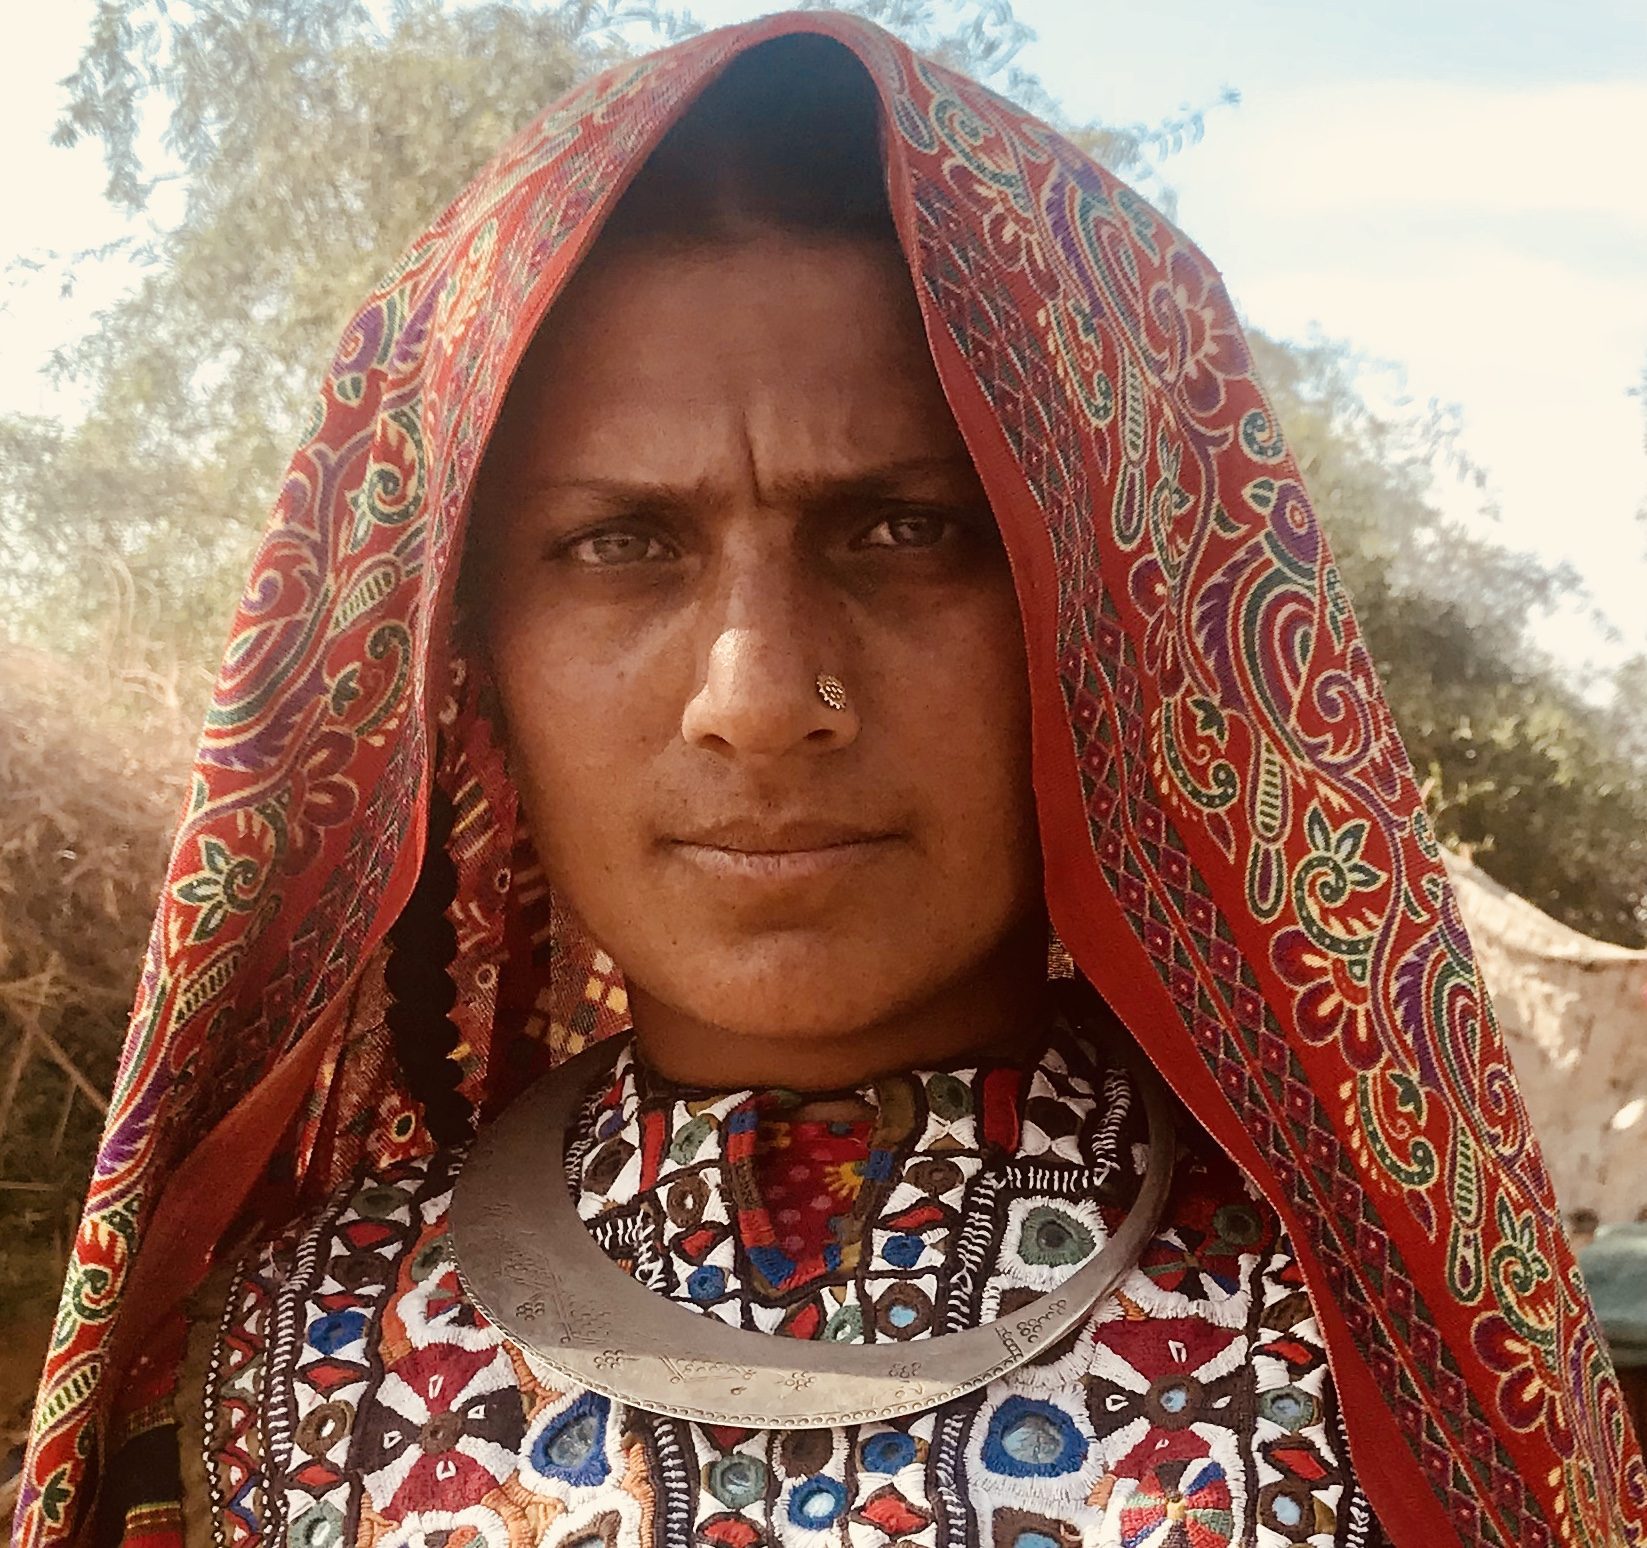 tribal woman dressed in intricately embroidered textiles in gujarat seen on an Indian Subcontinent safari